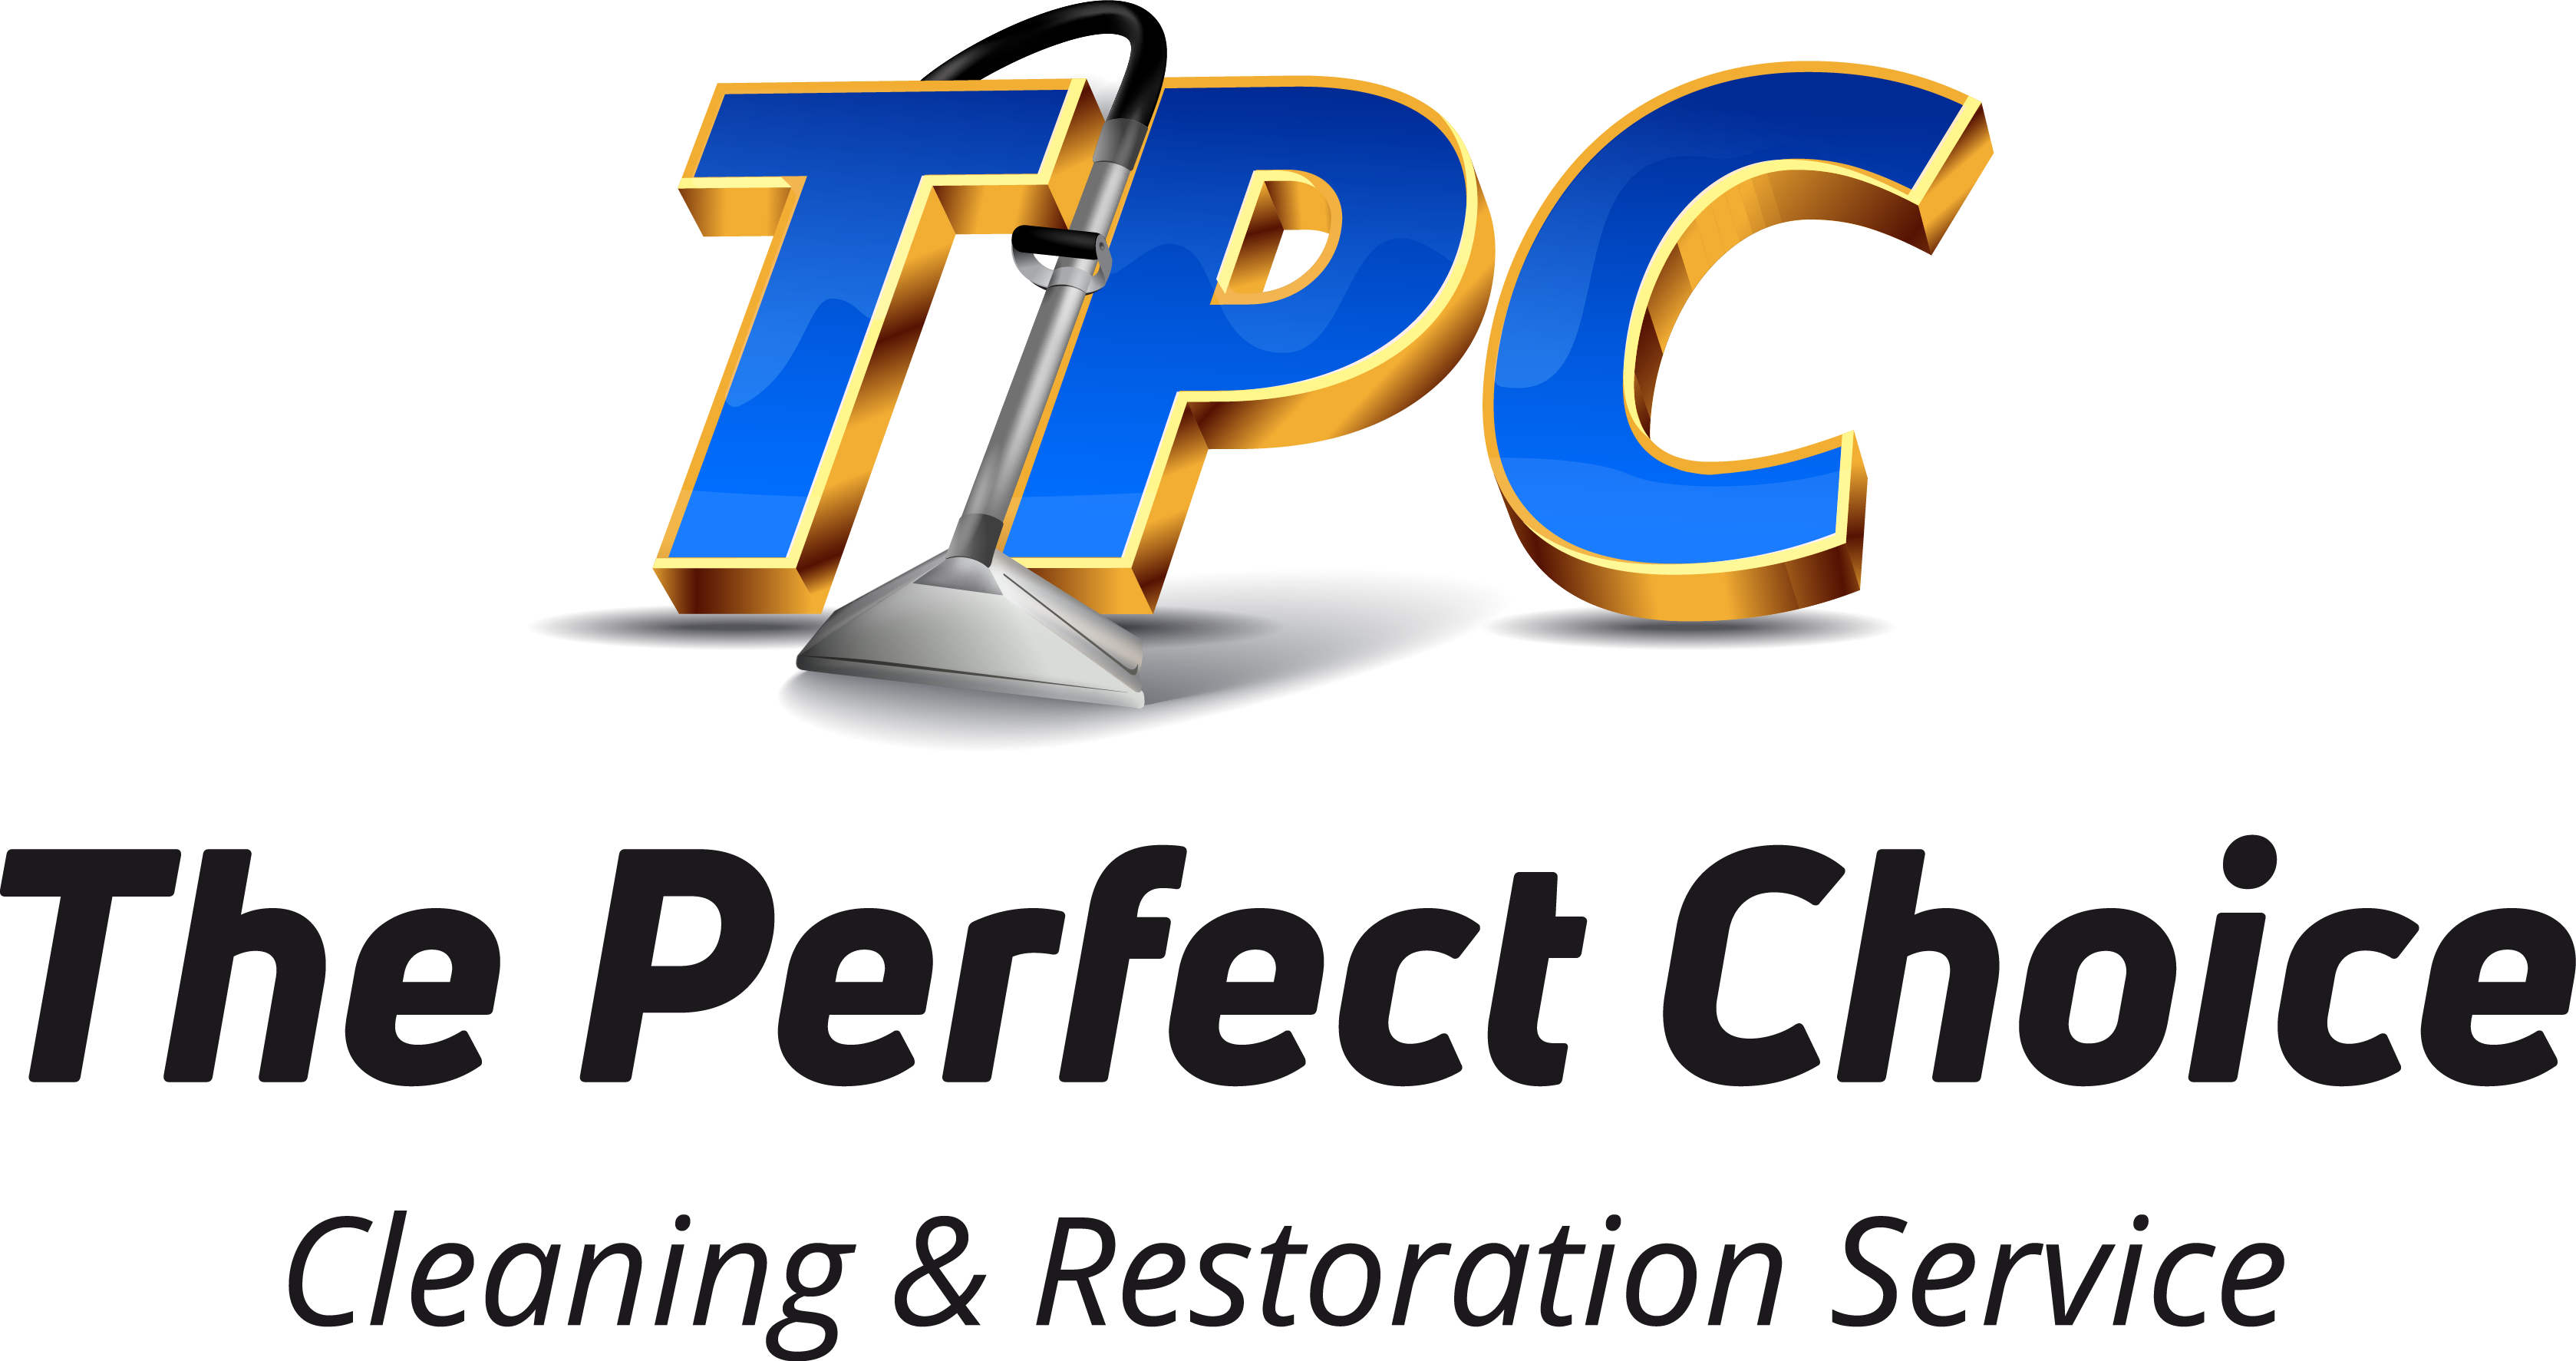 The Perfect Choice Cleaning & Restoration Service